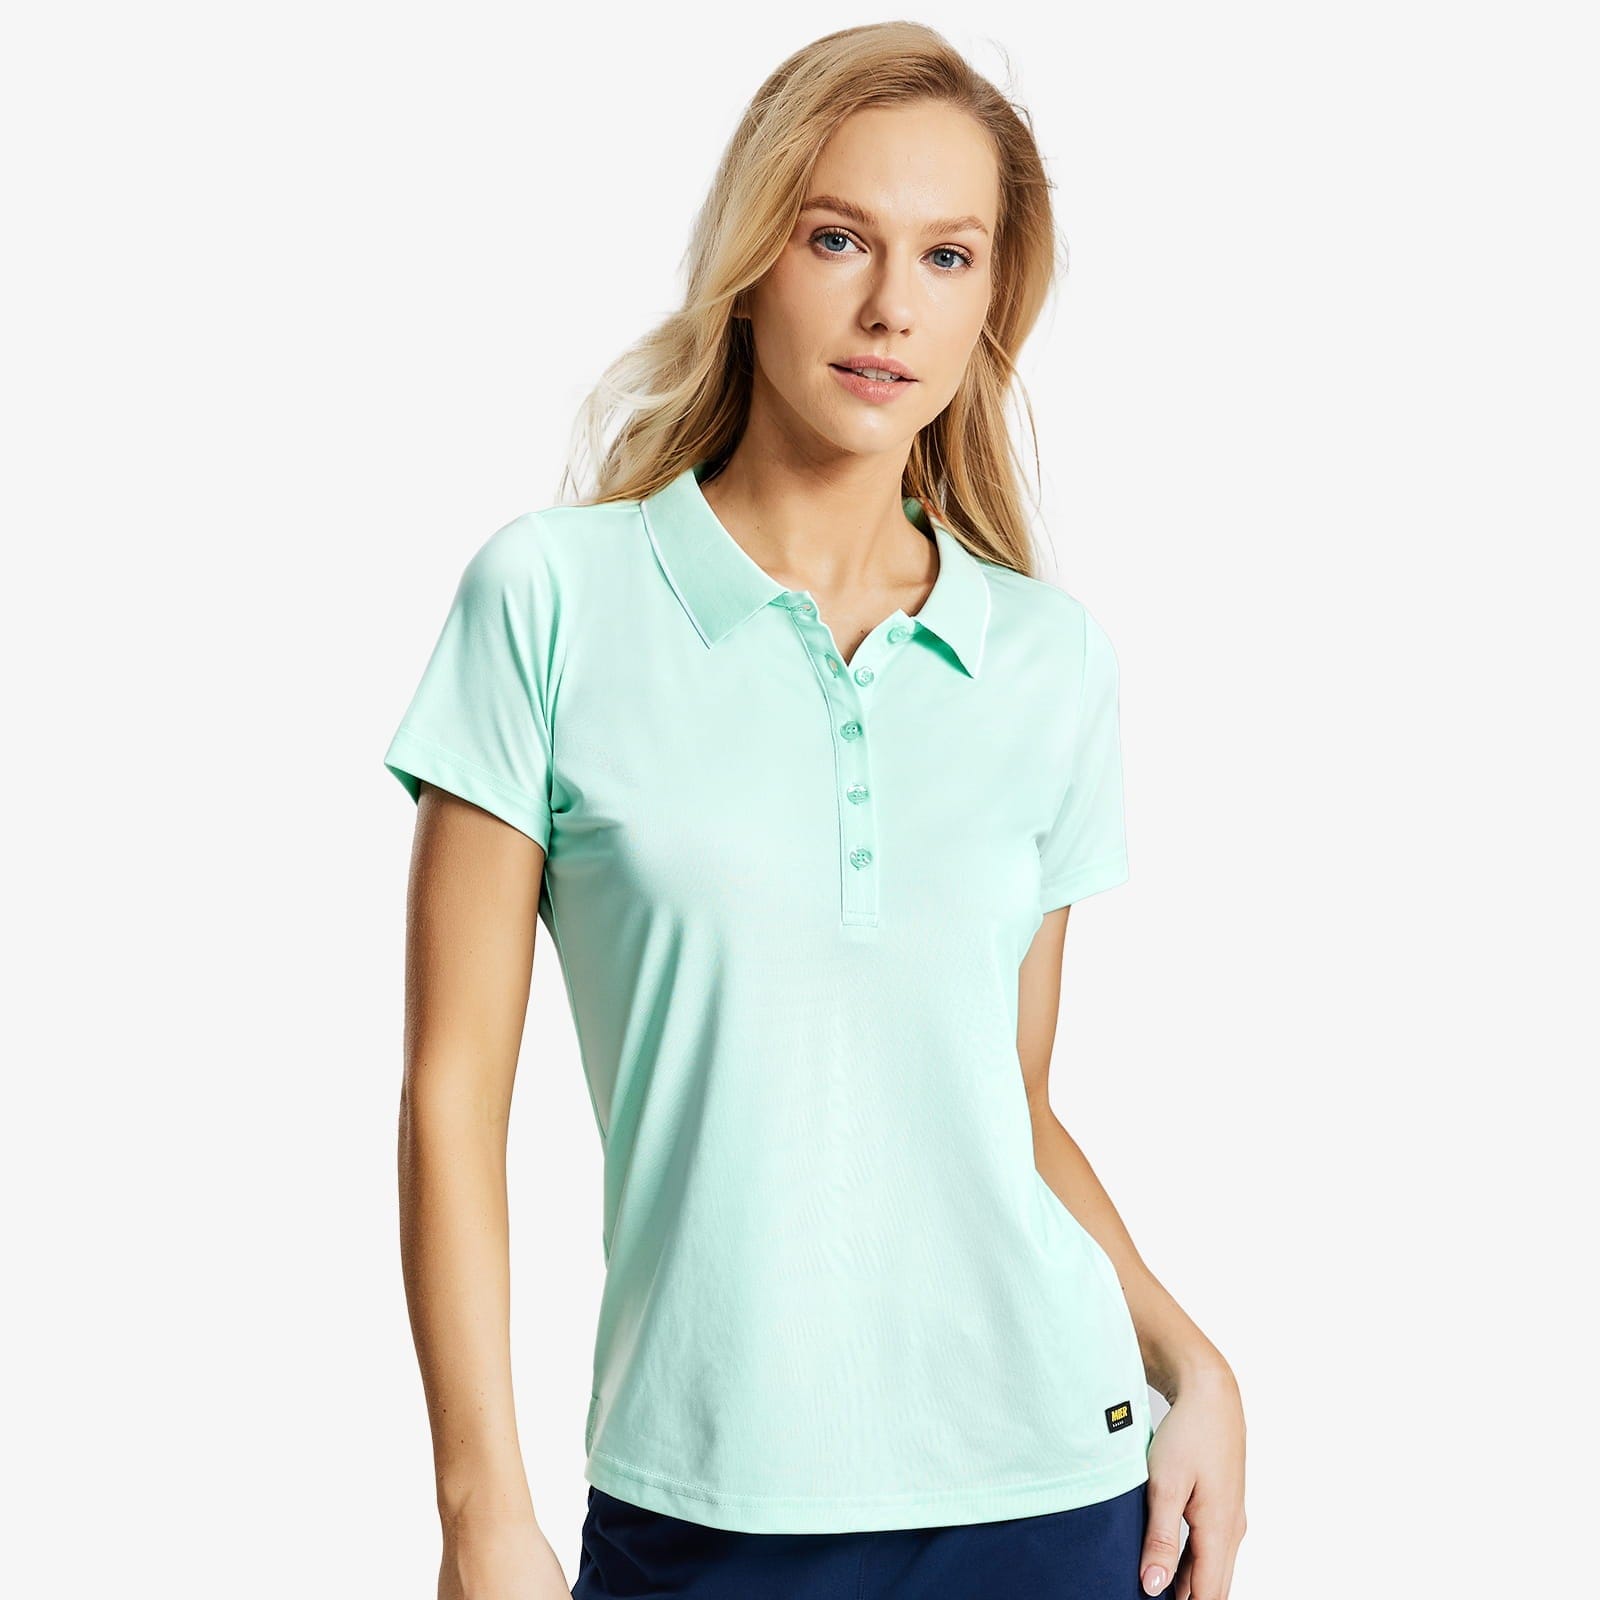 Women's Polo Shirts Short Sleeve Moisture Wicking Collared Tshirts Women Polo Mint Green / S MIER